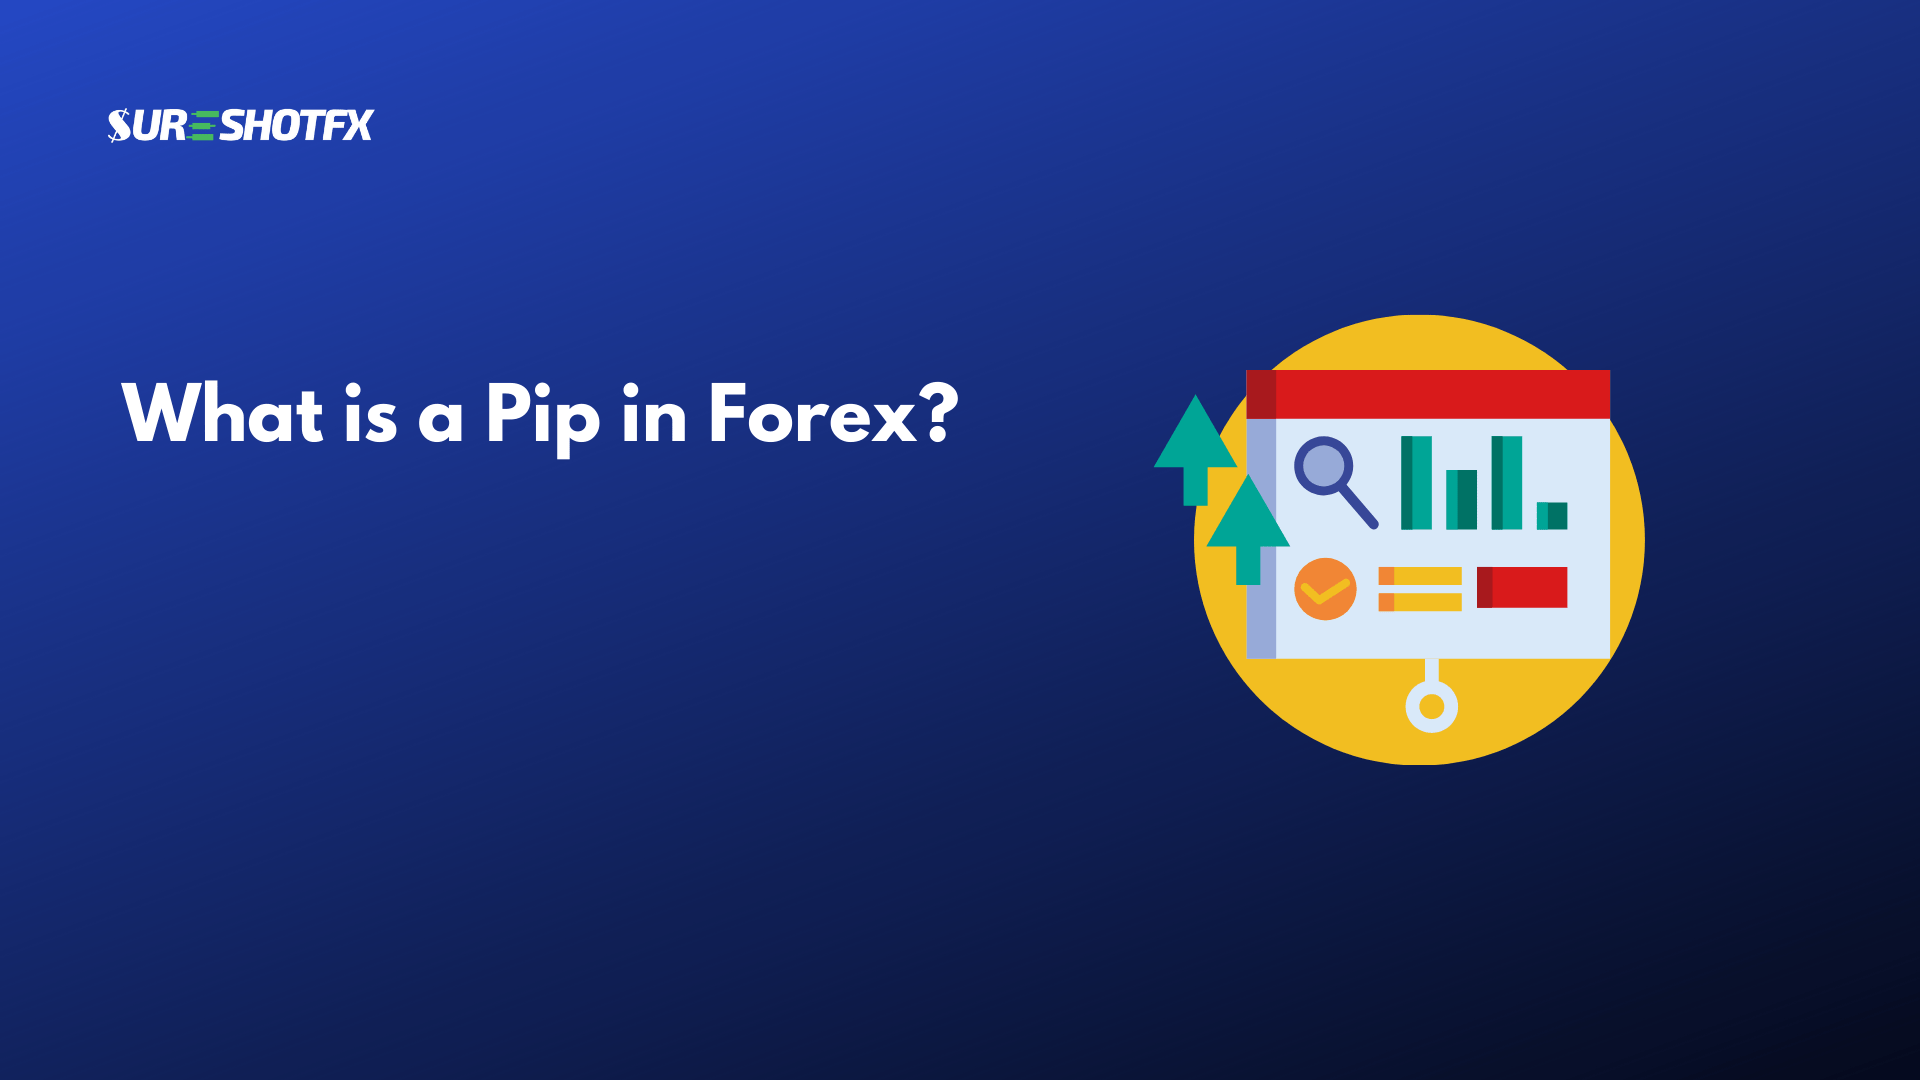 What is a pip in forex